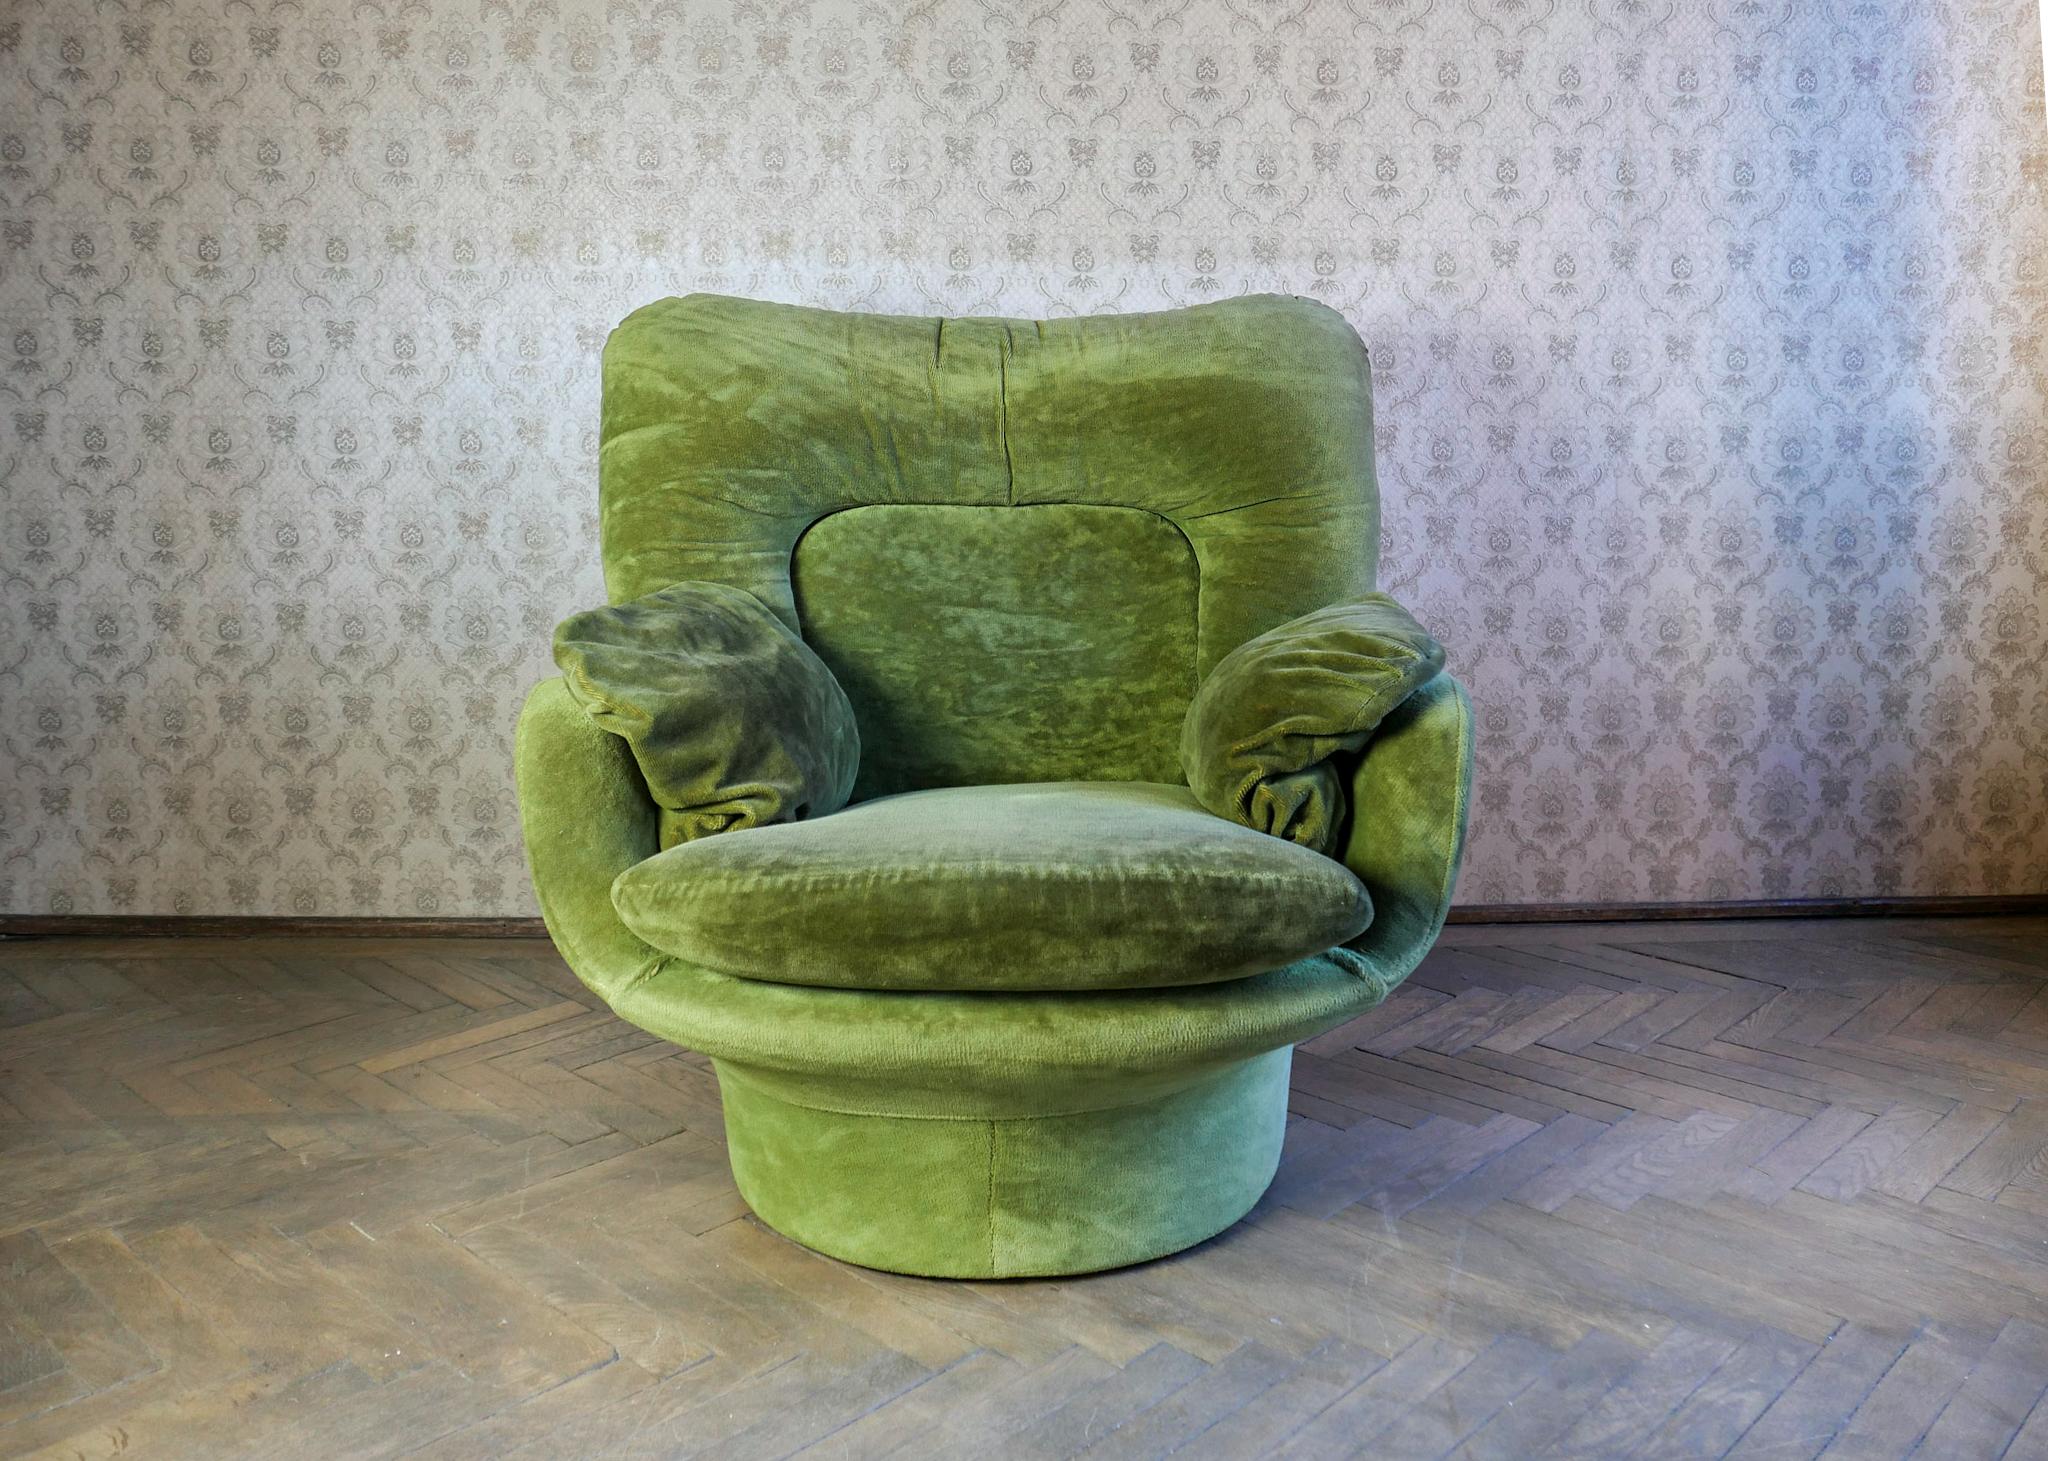 Mid-Century Modern green velvet lounge chairby Michel Cadestin, France 1970s

This iconic lounge chair by Michel Cadestin was produced by French furniture manufacturer Airborne in the 70s and hardly to be found nowadays. It is made of green velvet